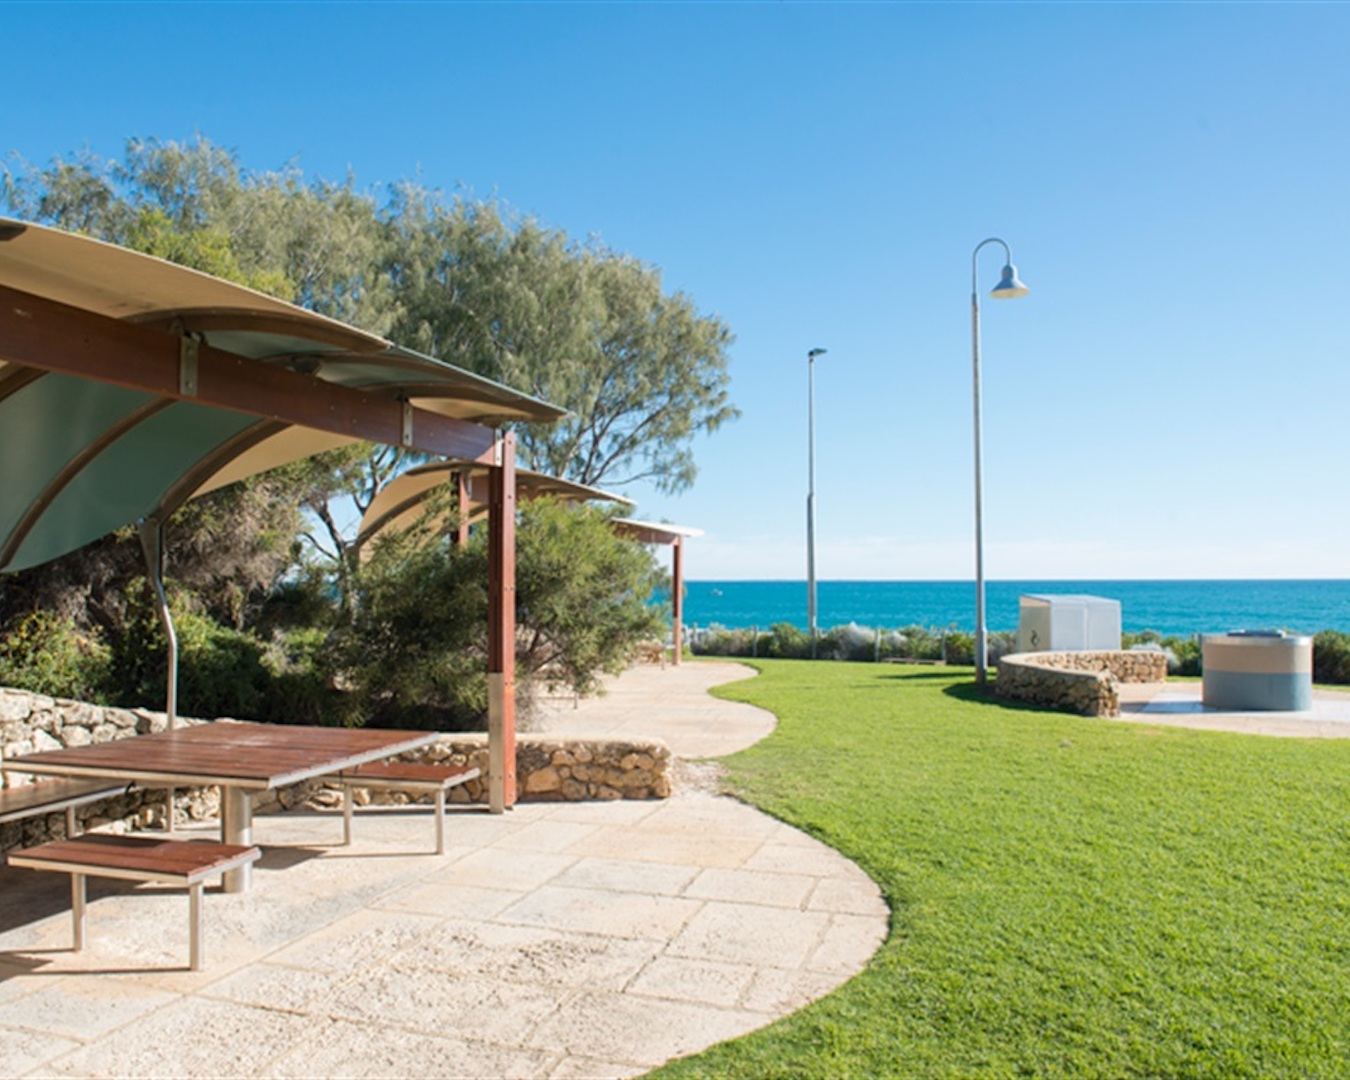 The lawn area at Floreat Beach, one of the best beaches in Perth